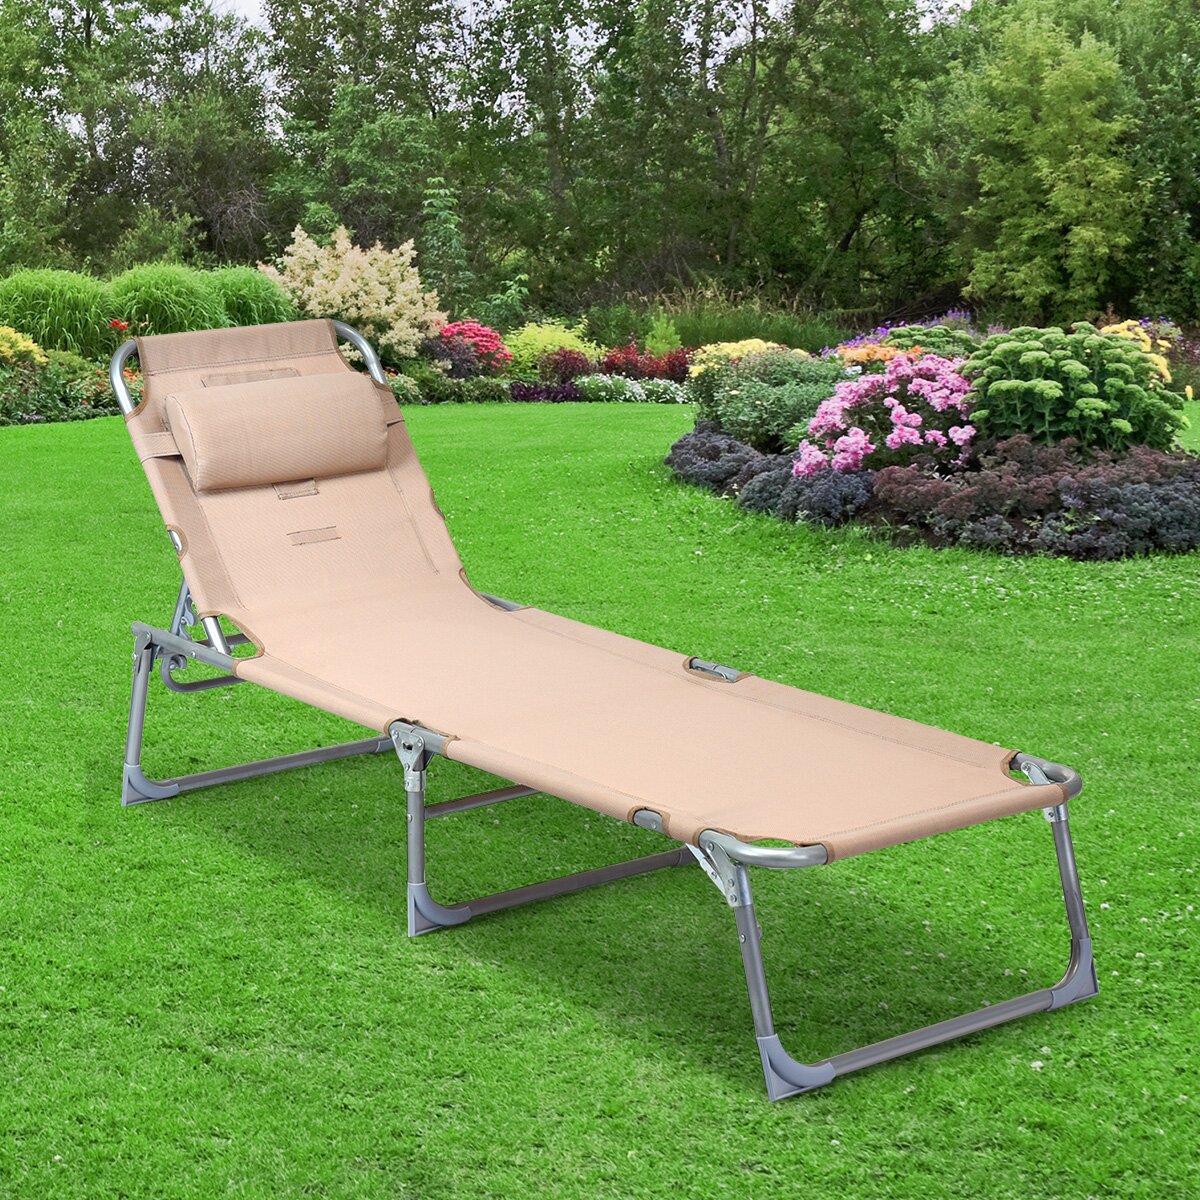 Patel Adjustable Pool Chaise Lounge Chair Bench Recliner Beach Outdoor Patio Yard, Outer Frame Material: Metal, Weight Capacity: 264 - image 1 of 7